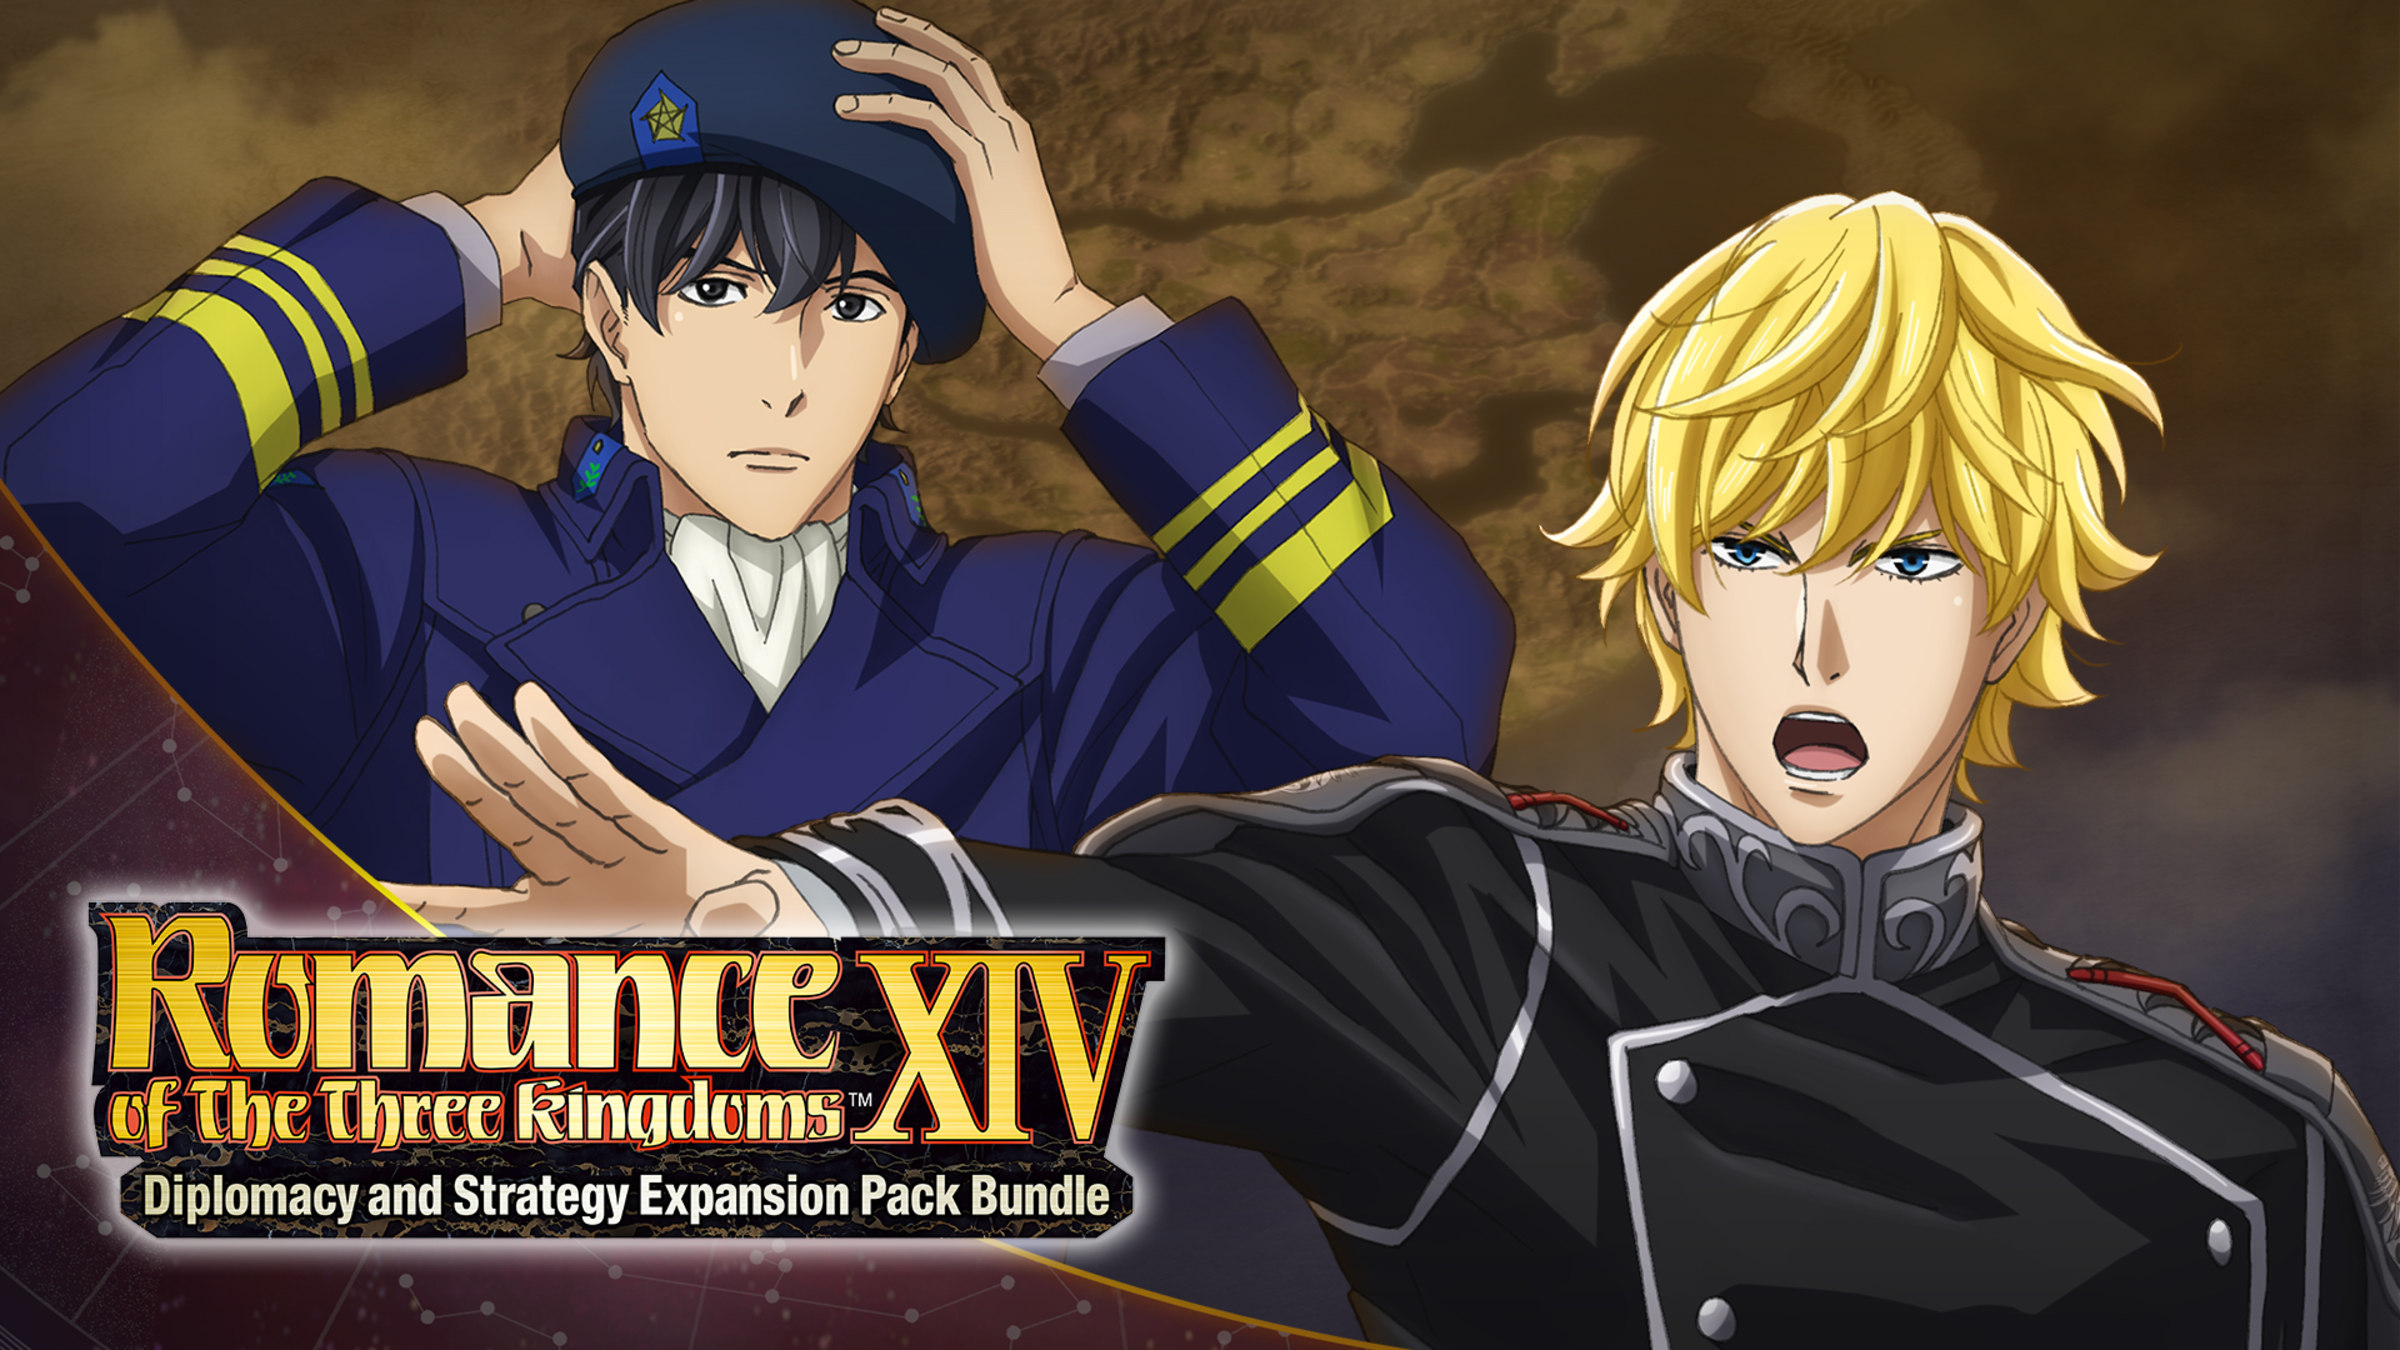 Legend of the Galactic Heroes Collab: Reinhard & Yang for Nintendo Switch -  Nintendo Official Site